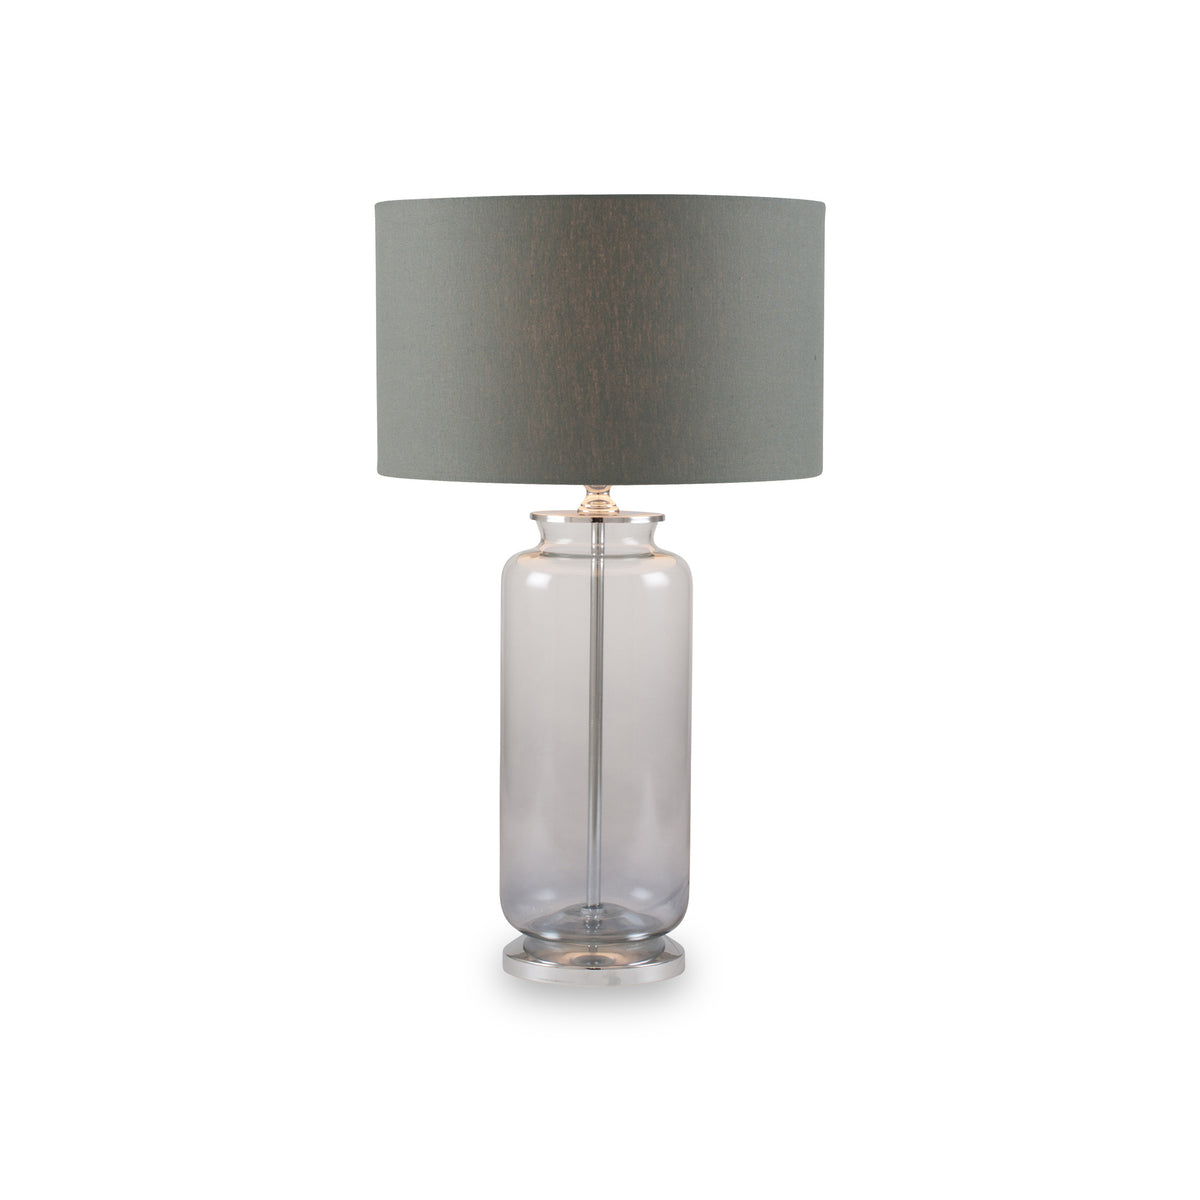 Vivienne Grey Ombre Glass Table Lamp from Roseland Furniture